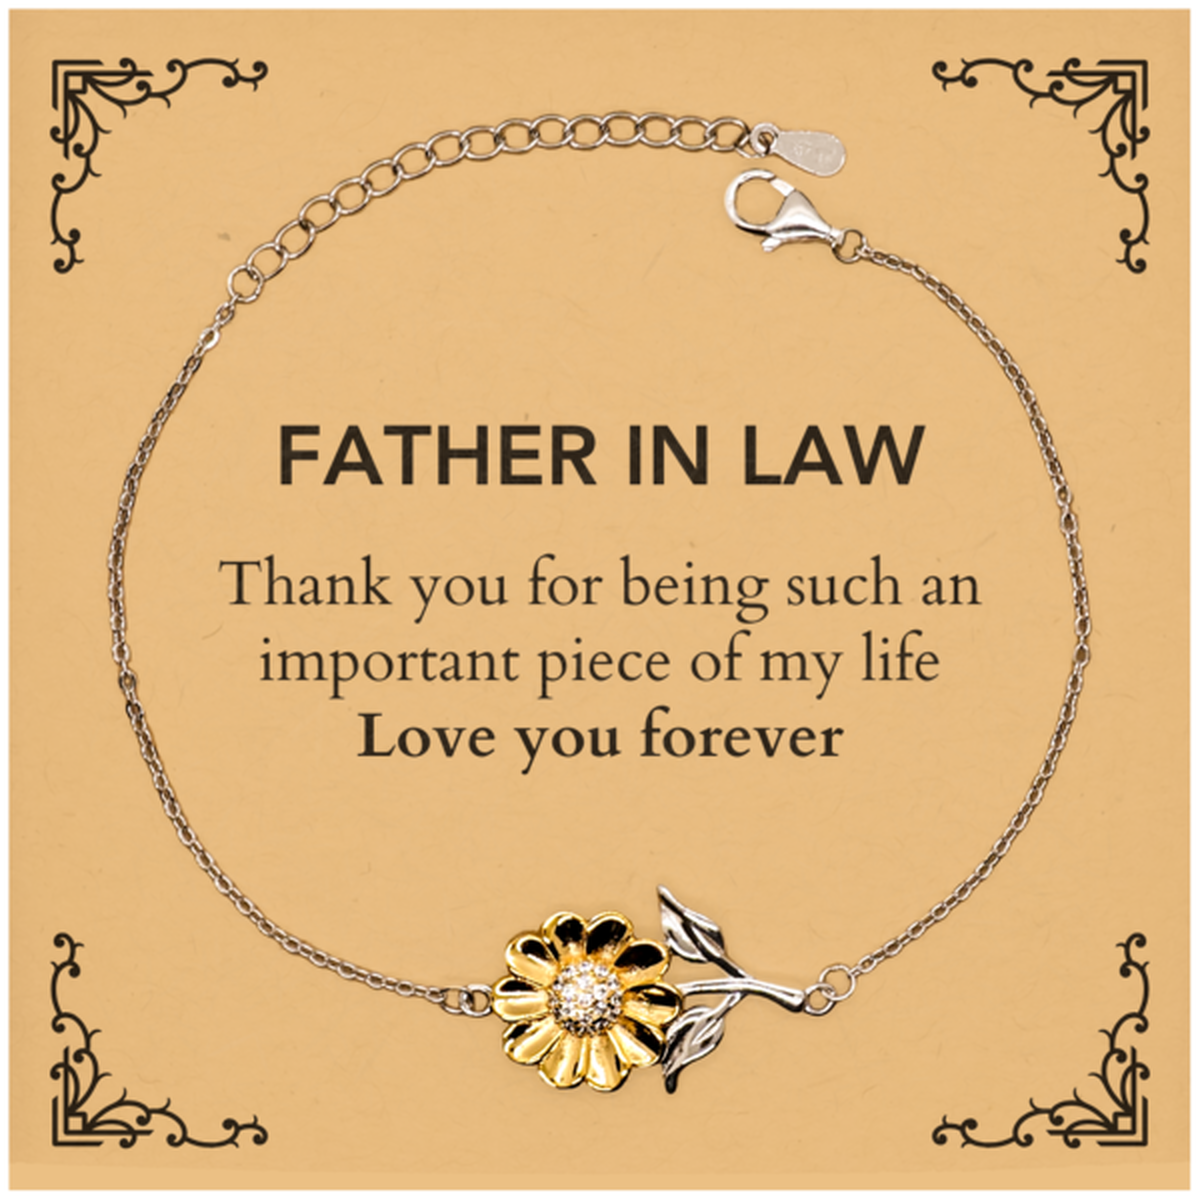 Appropriate Father In Law Sunflower Bracelet Epic Birthday Gifts for Father In Law Thank you for being such an important piece of my life Father In Law Christmas Mothers Fathers Day